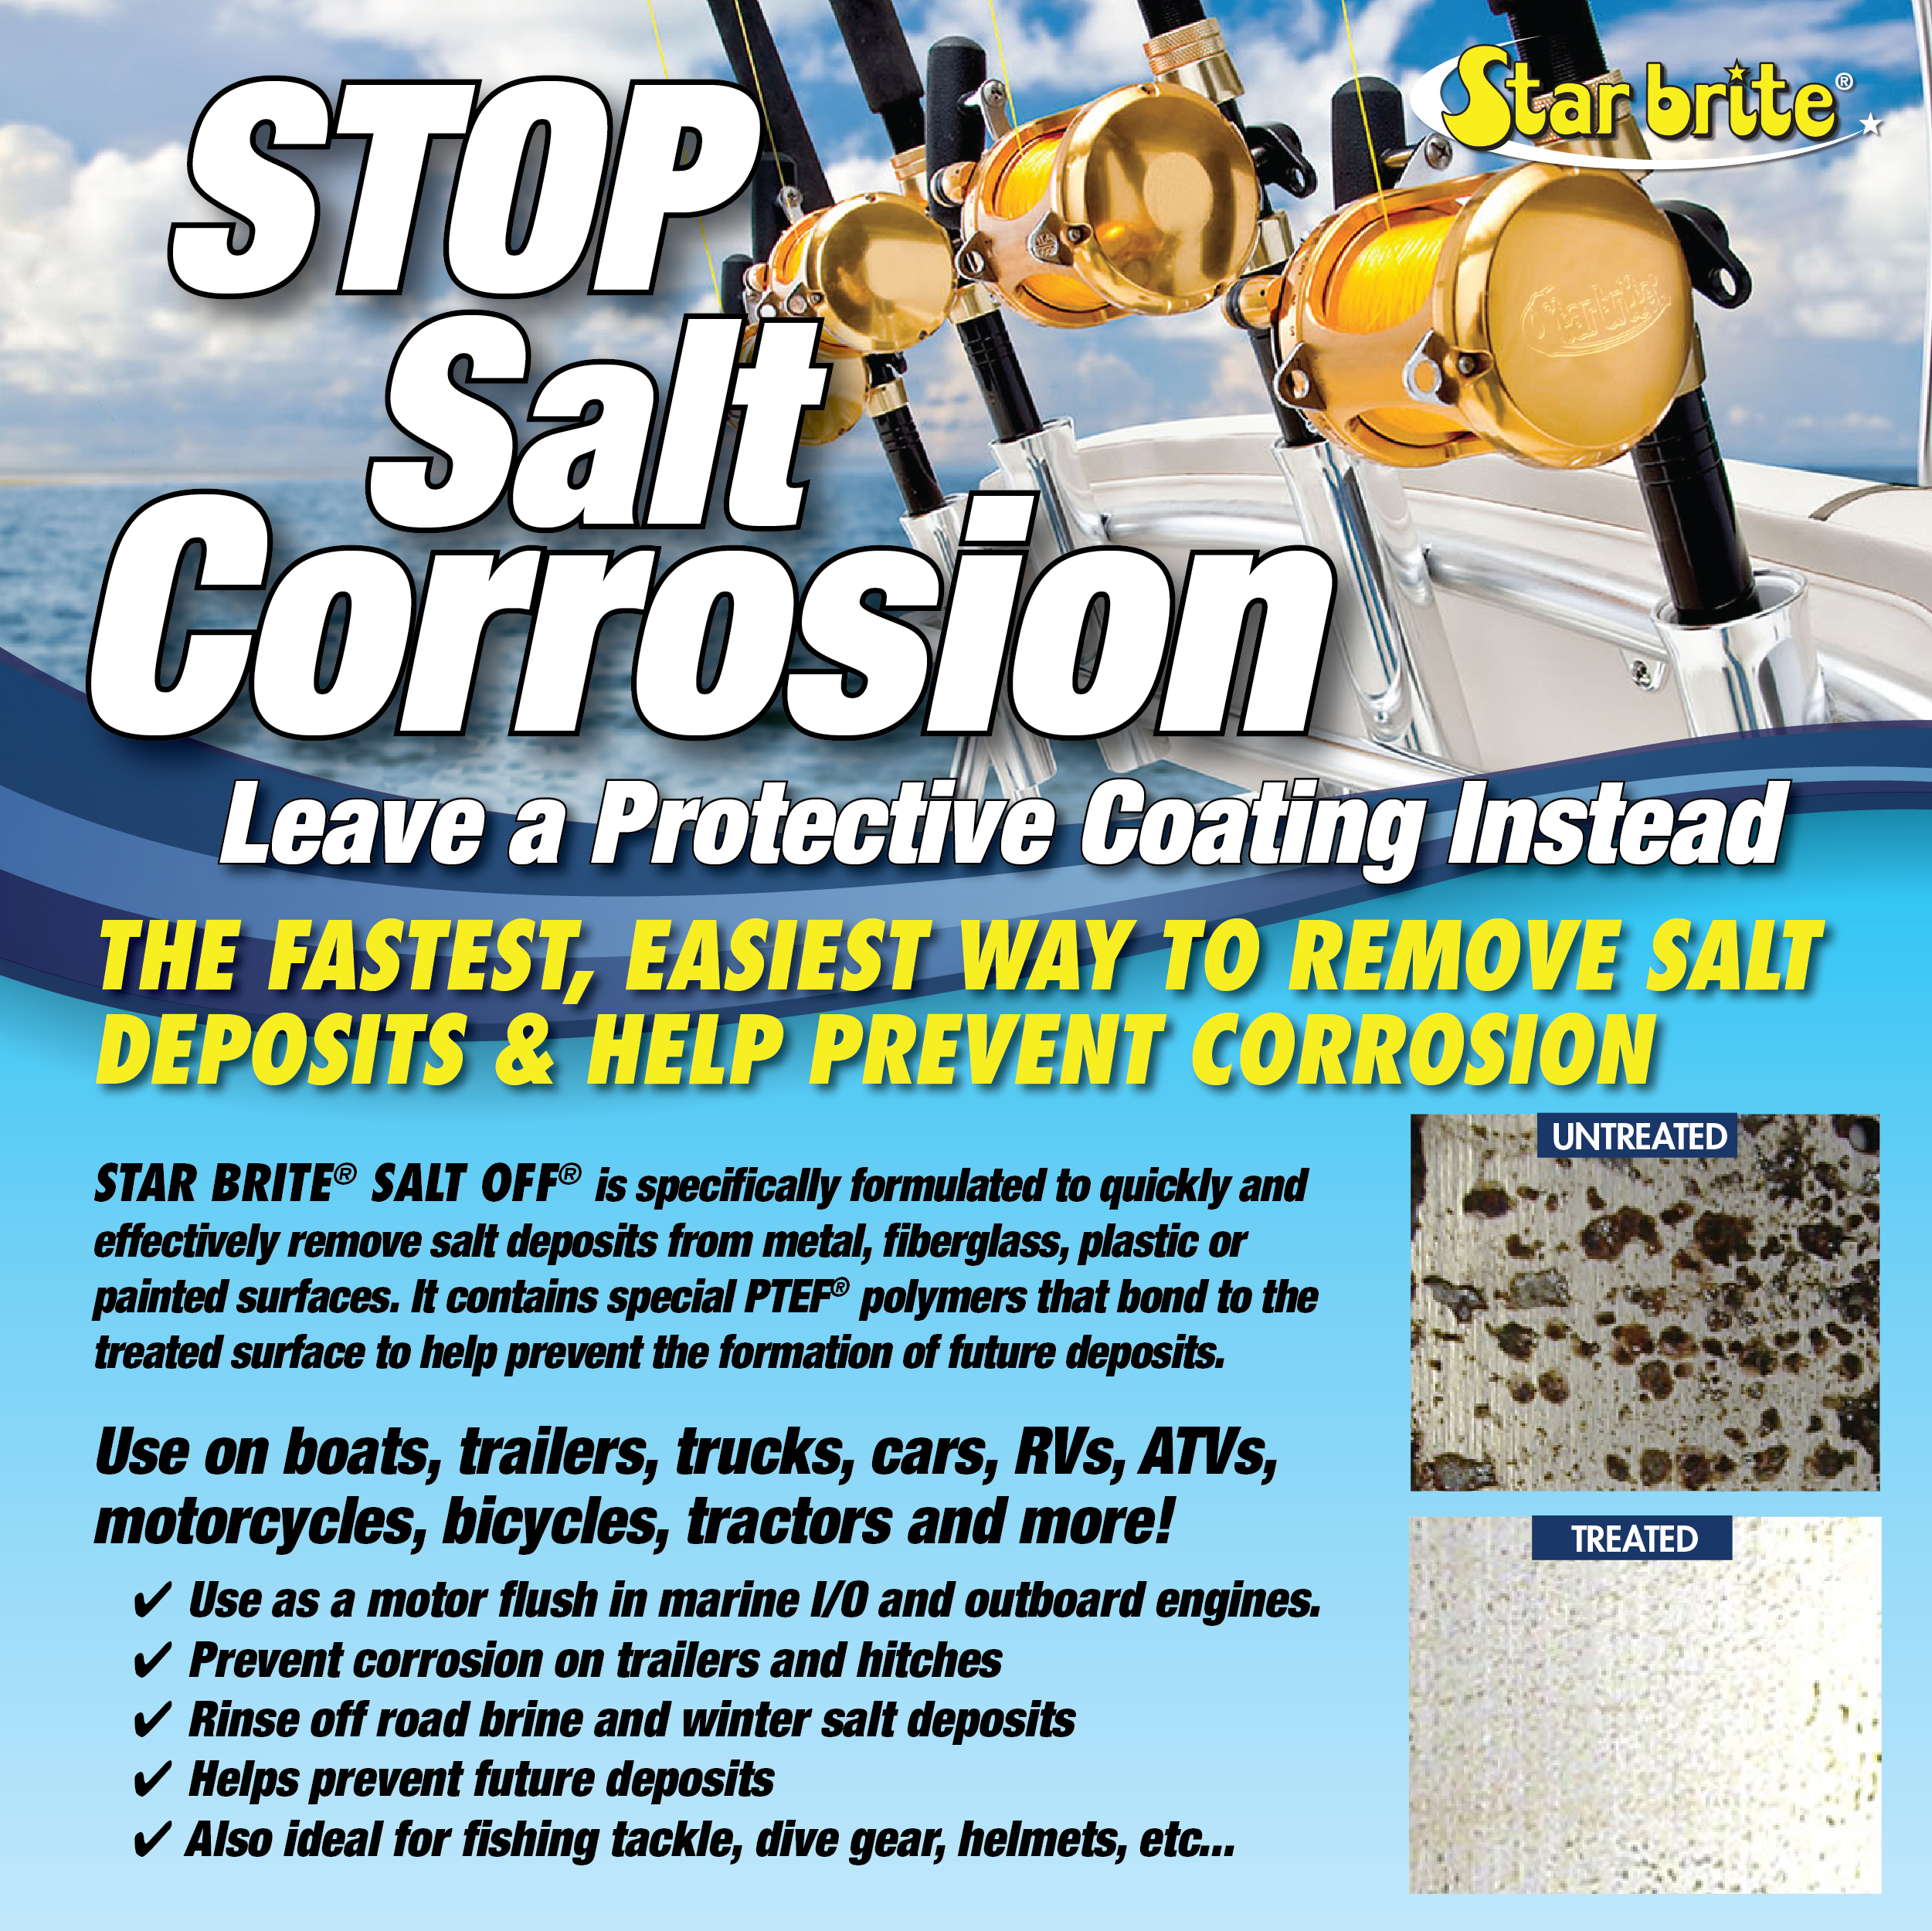 Star Brite Salt Off Concentrate with PTEF 1 Gallon